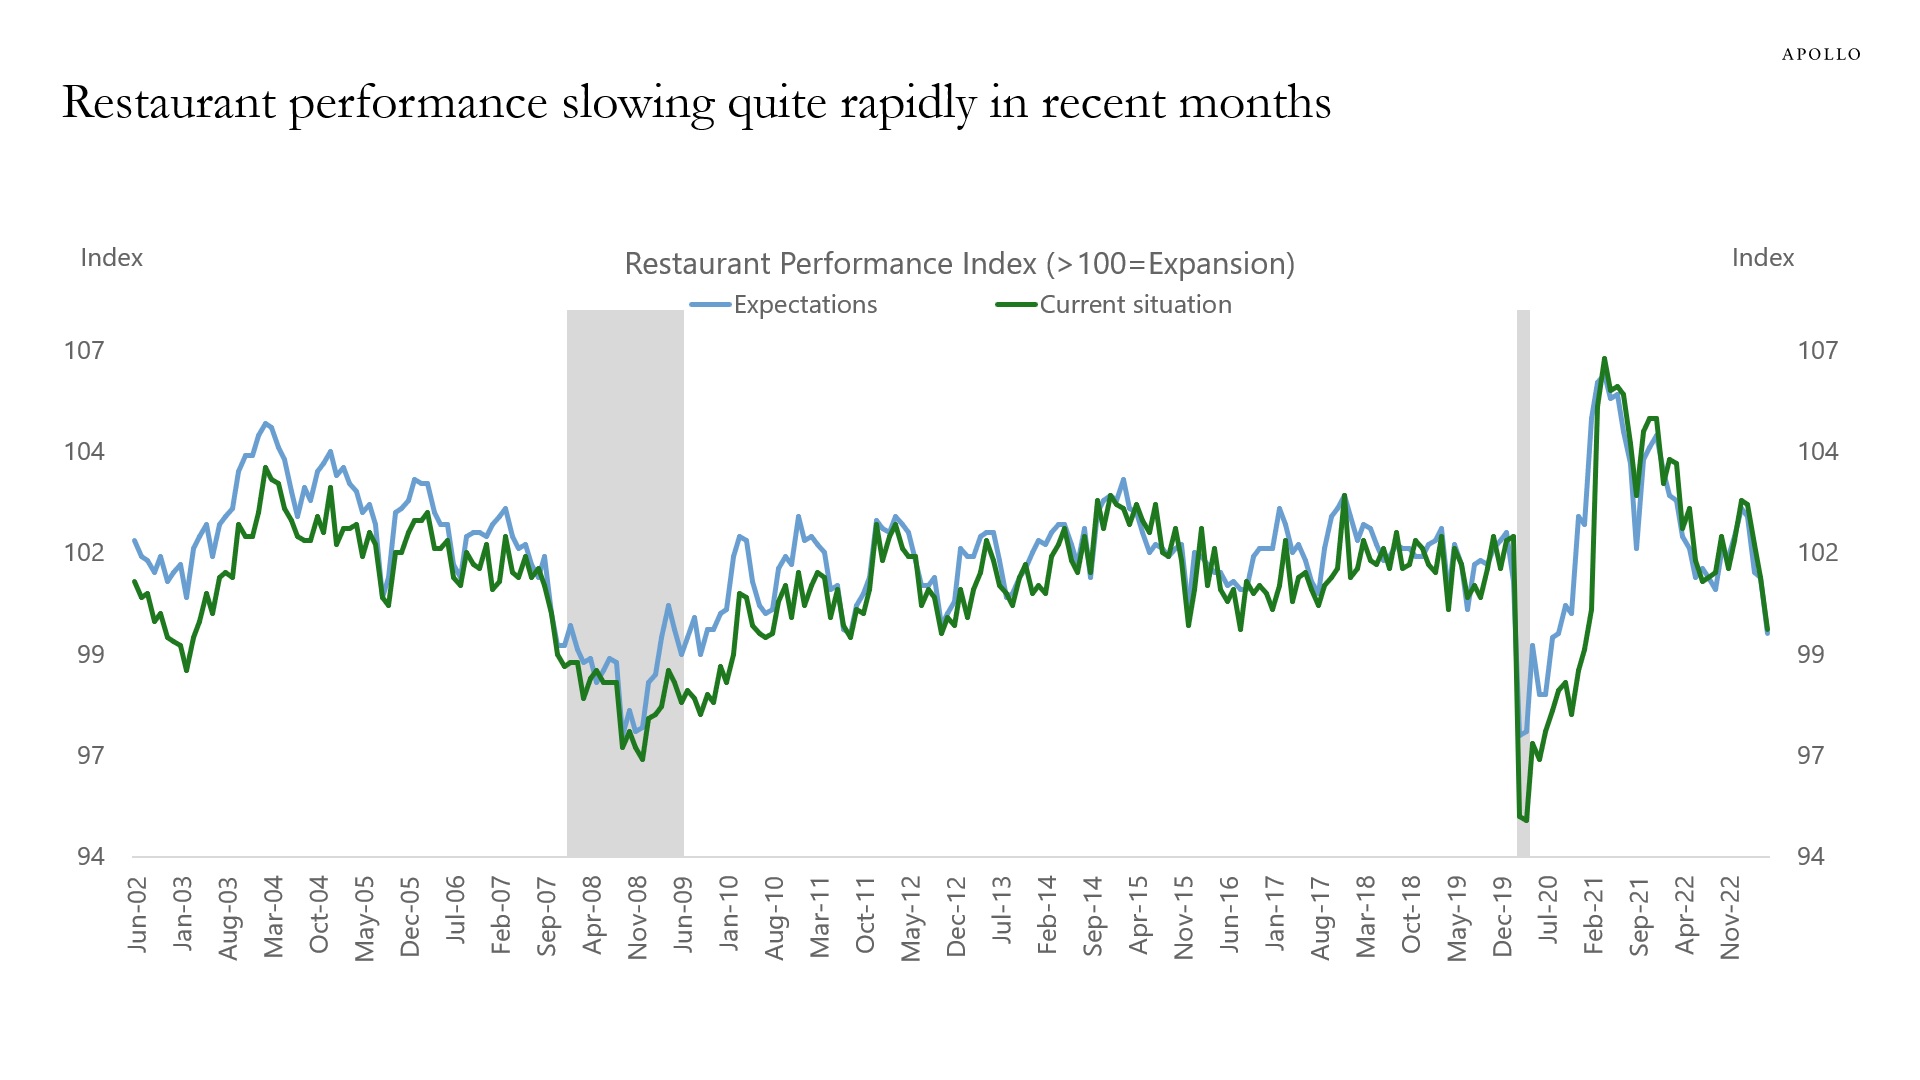 Restaurant performance is sharply slowing down.